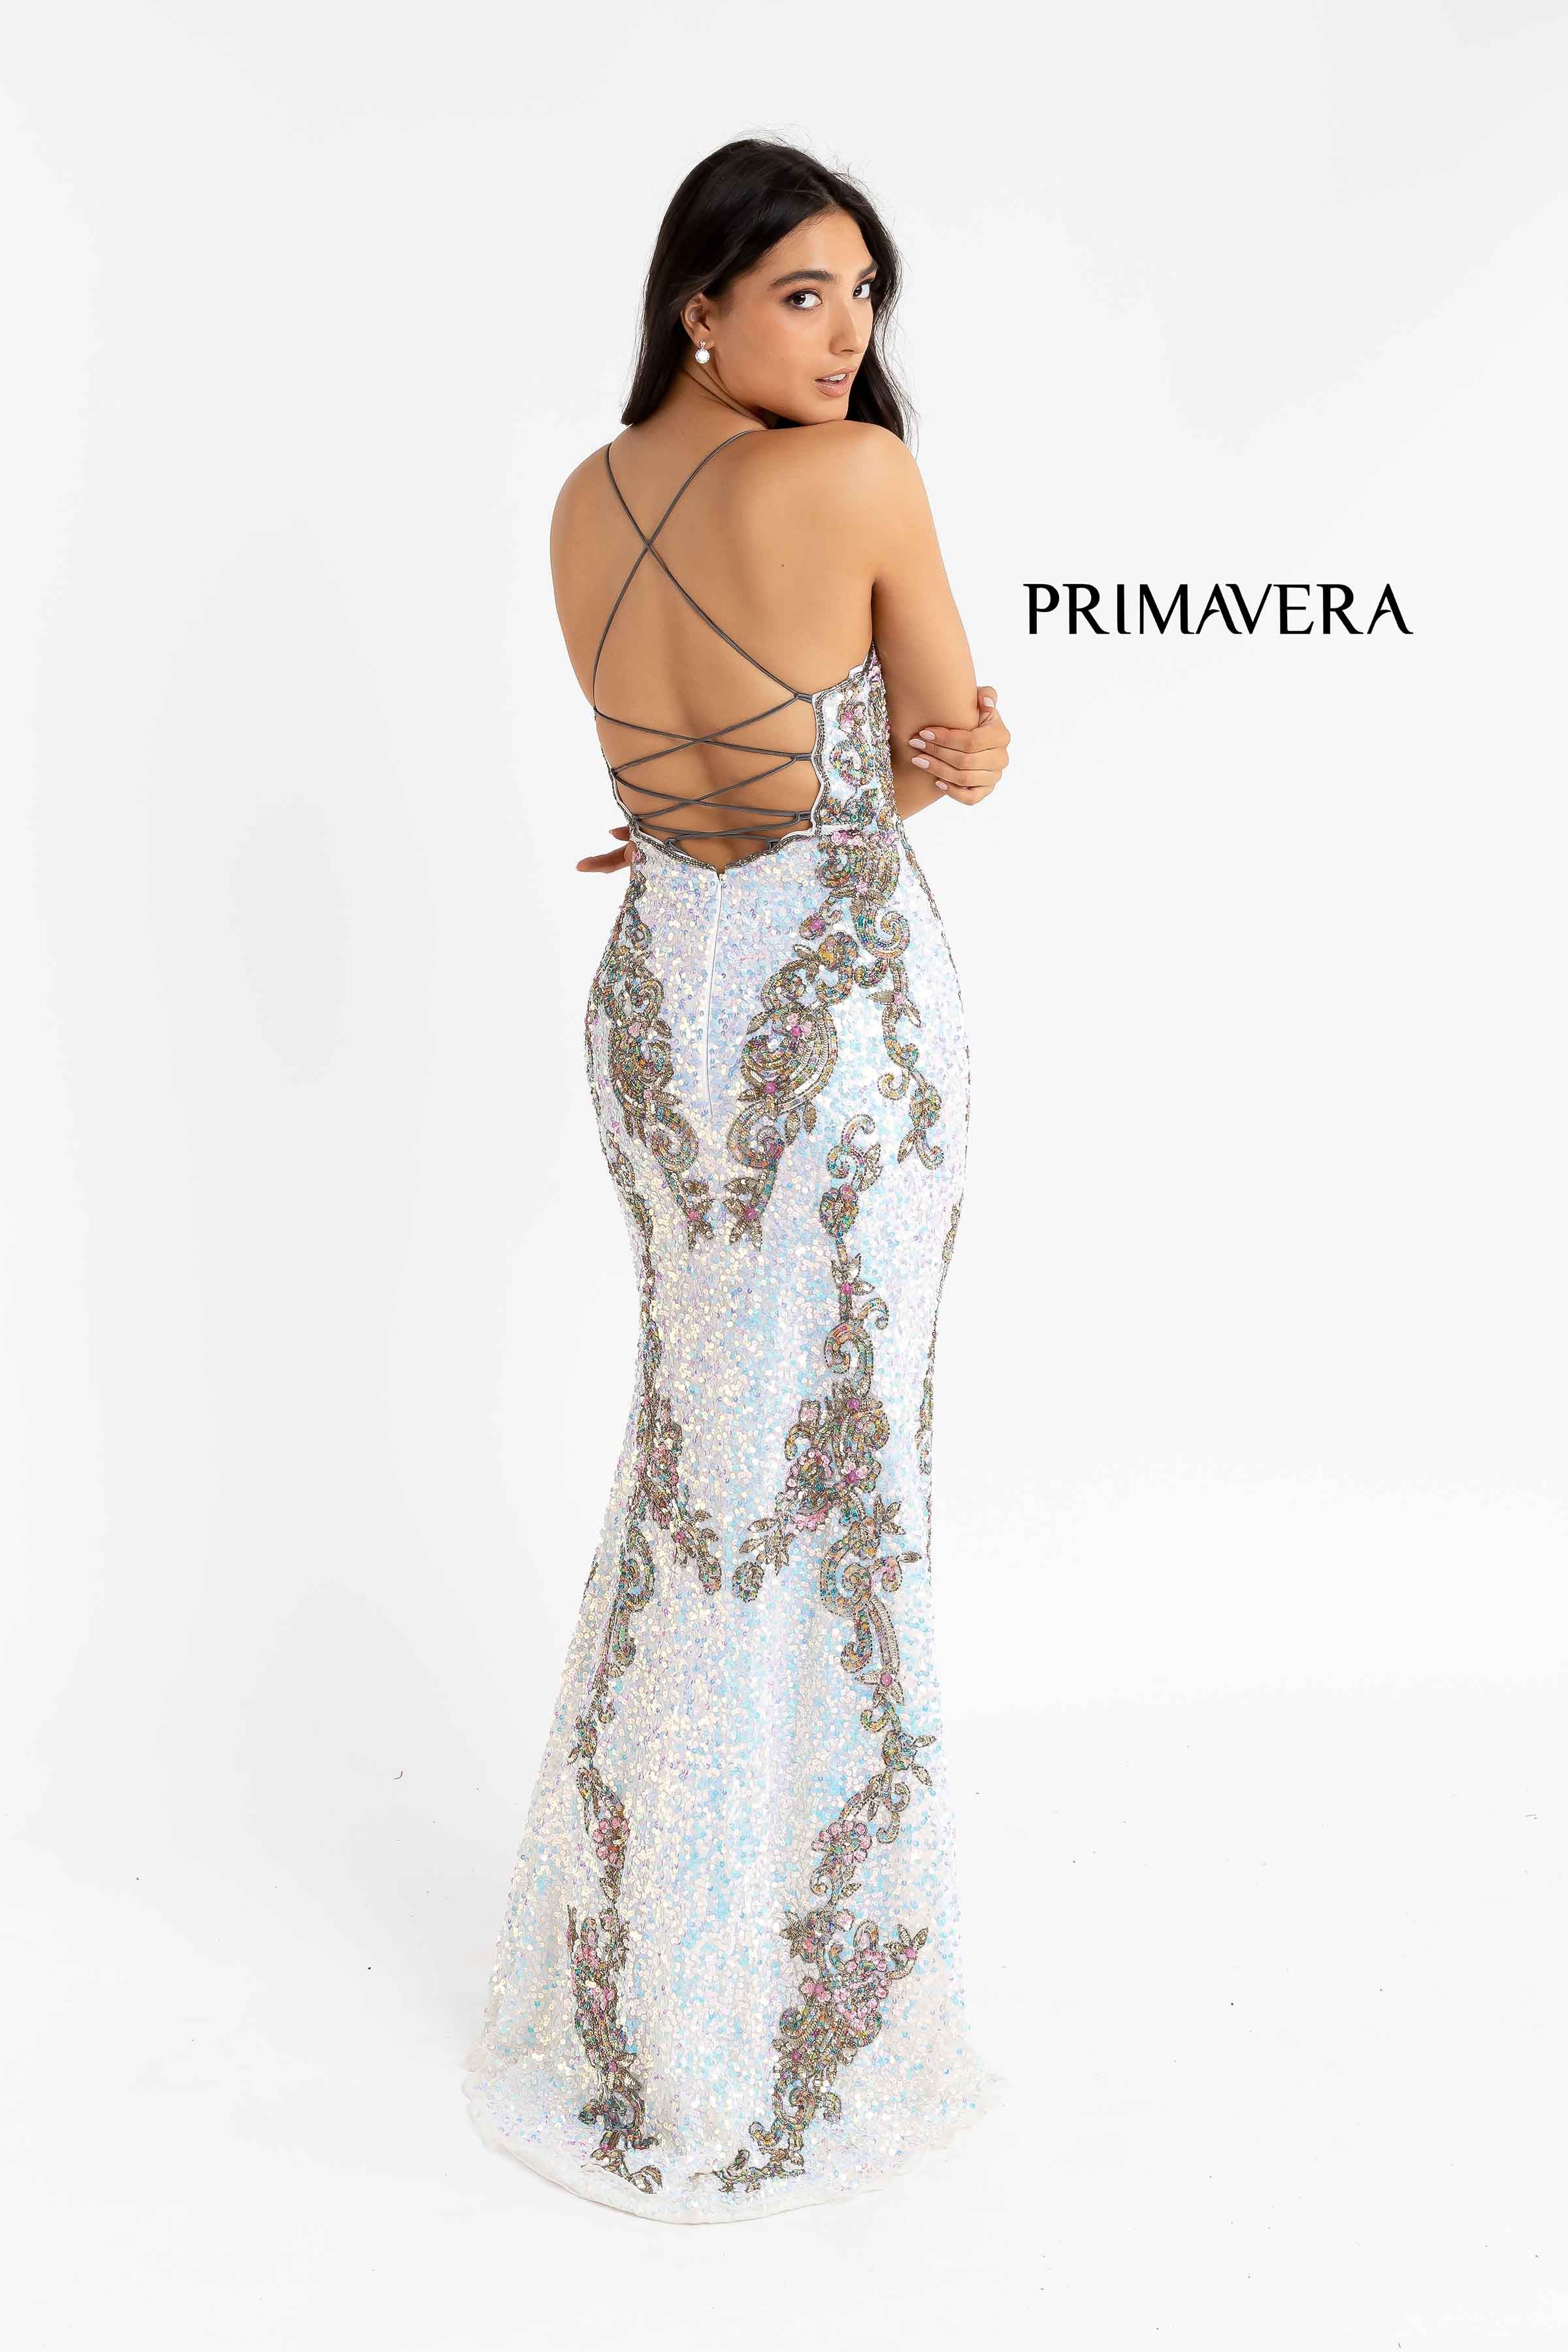 Plunging V-Neck Strappy Gown With Slit 01 By Primavera Couture -3211